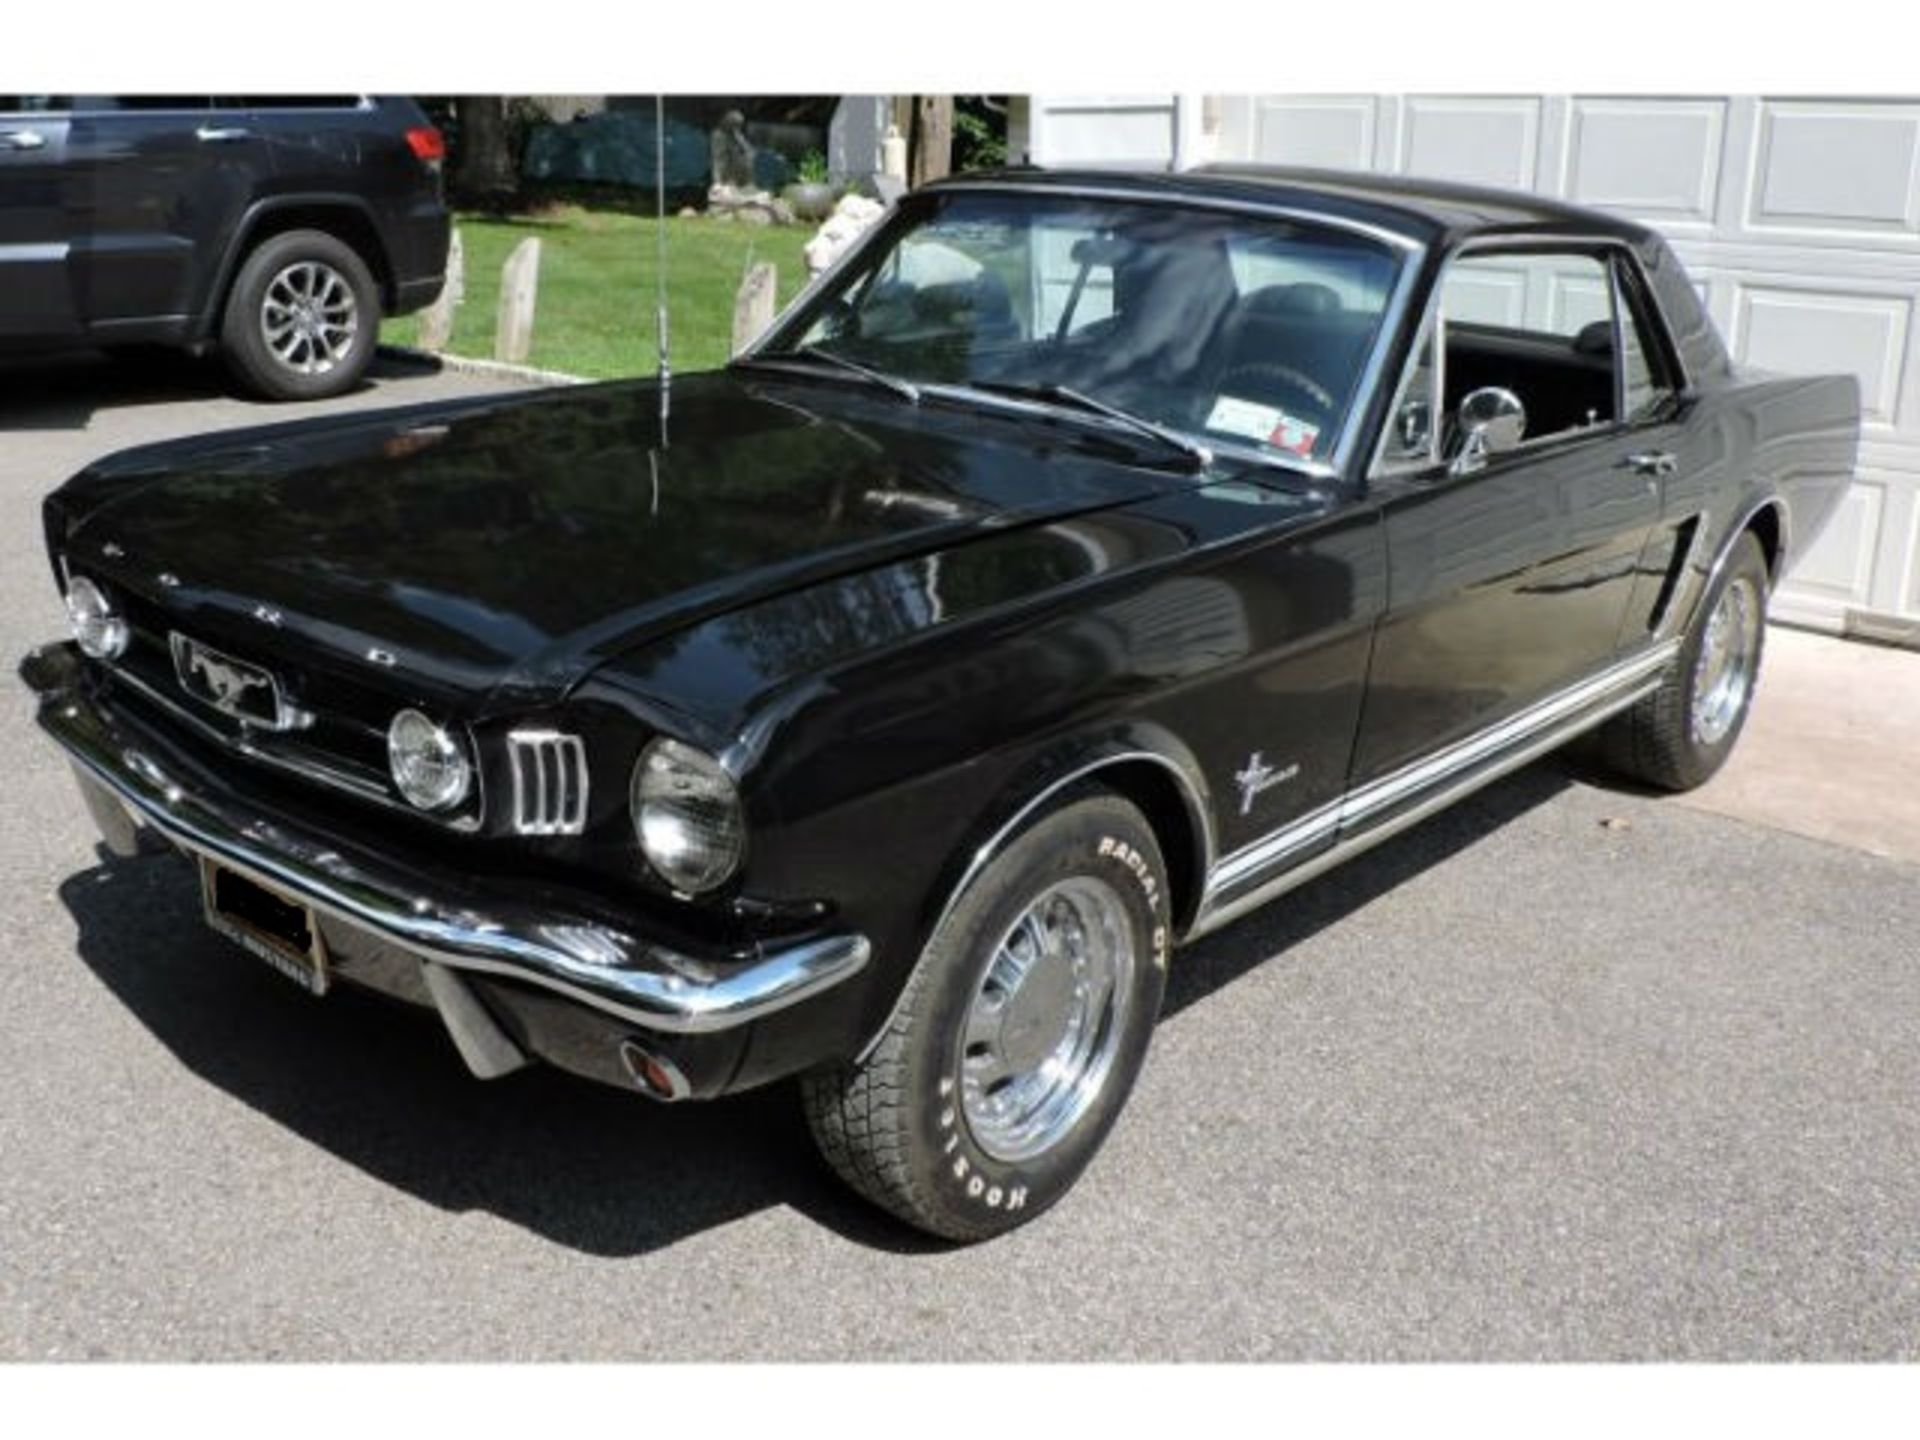 65' Ford Mustang - Year 1965, Automatic Transmission, Original Factory A/C, 6 Cylinders, Approx 72,